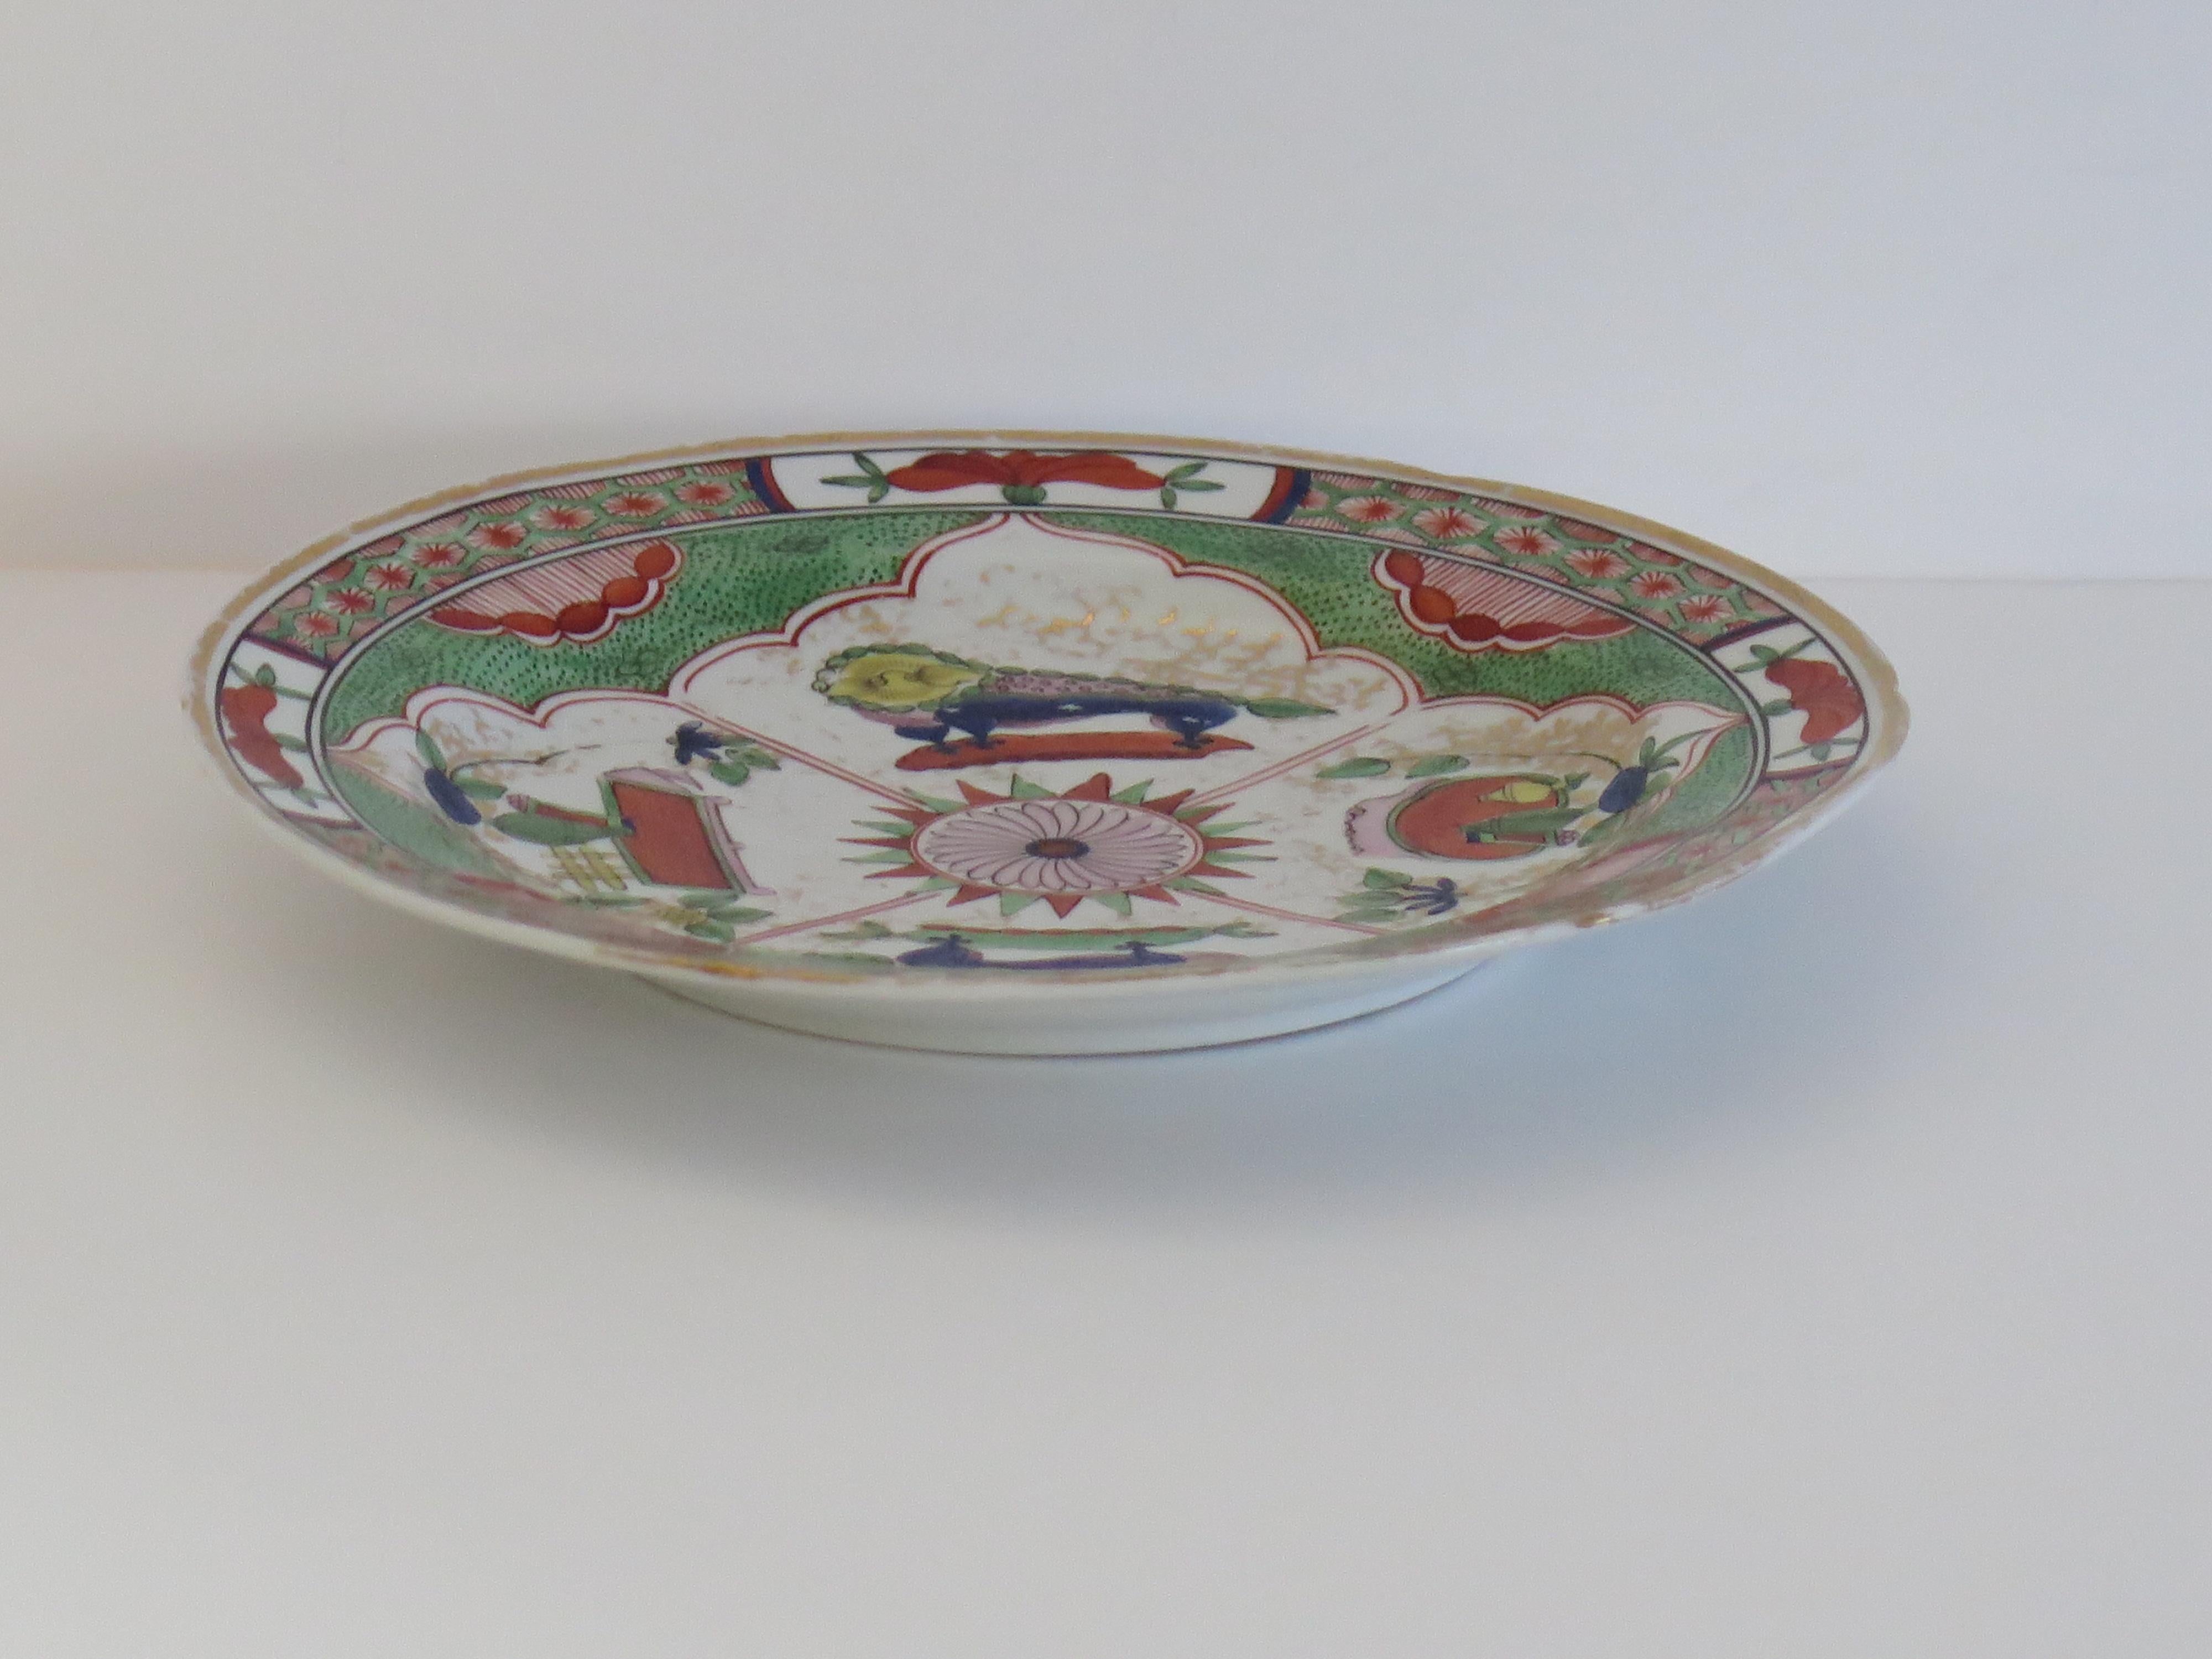 George III Assiette Chamberlains Worcester Dragon in Compartments Ptn. 75, vers 1800 en vente